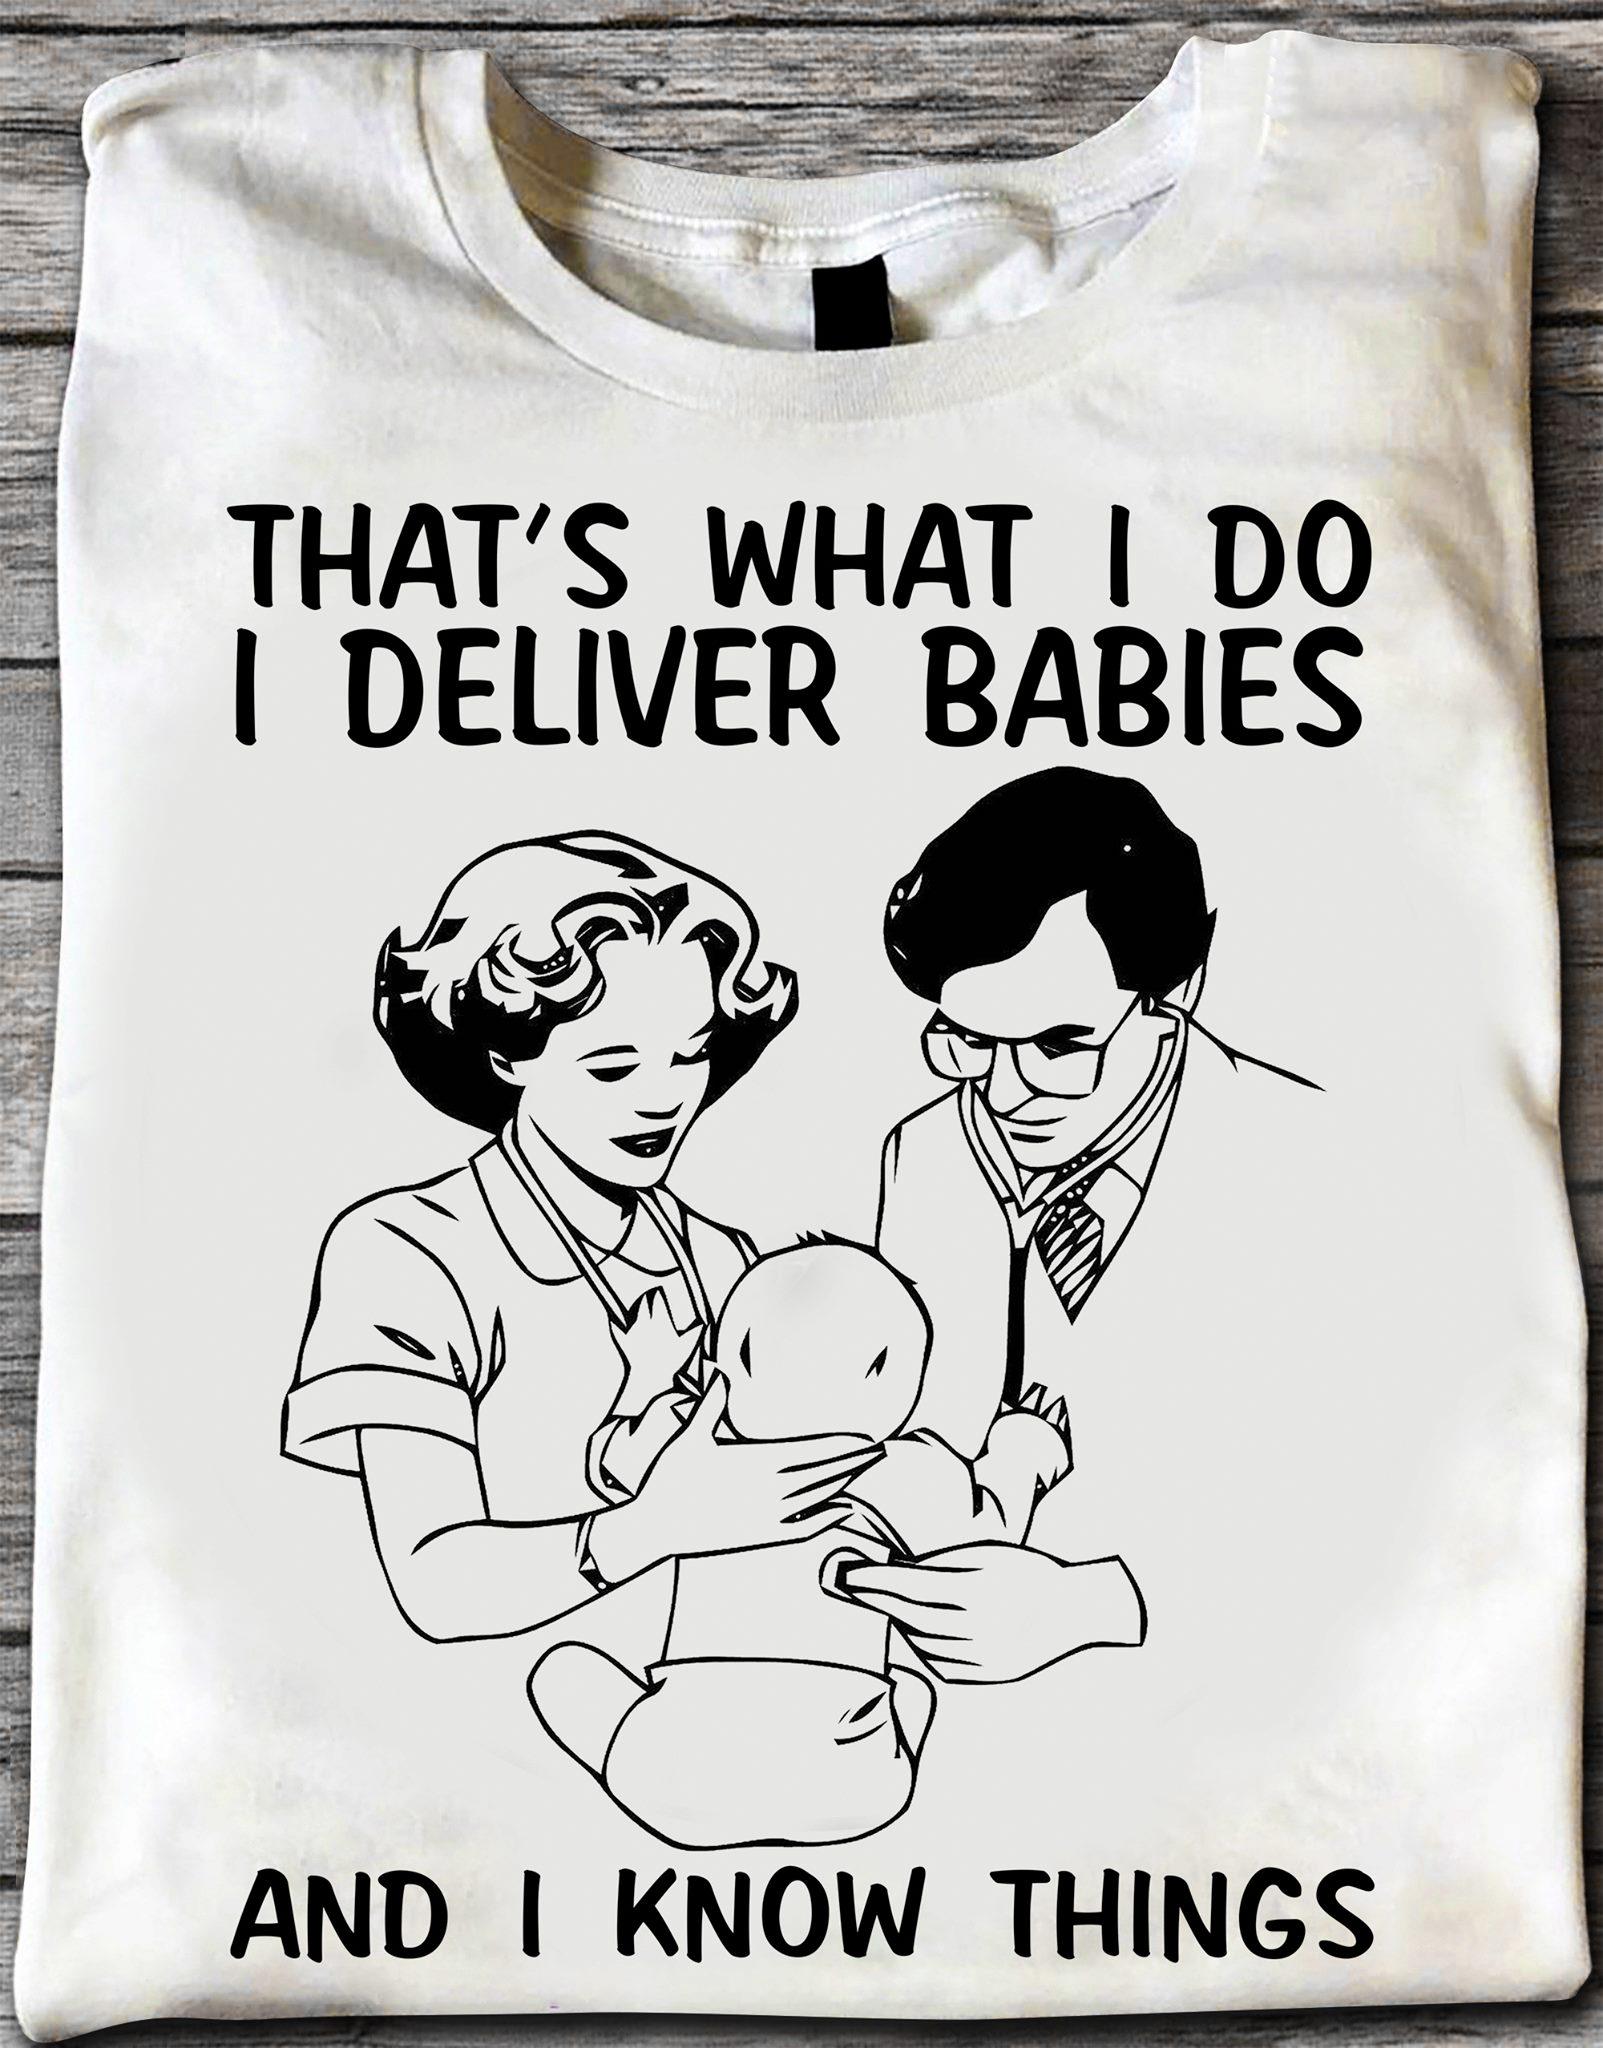 That's what I do I deliver babies and I know things - Doctor the job, pediatrician doctor